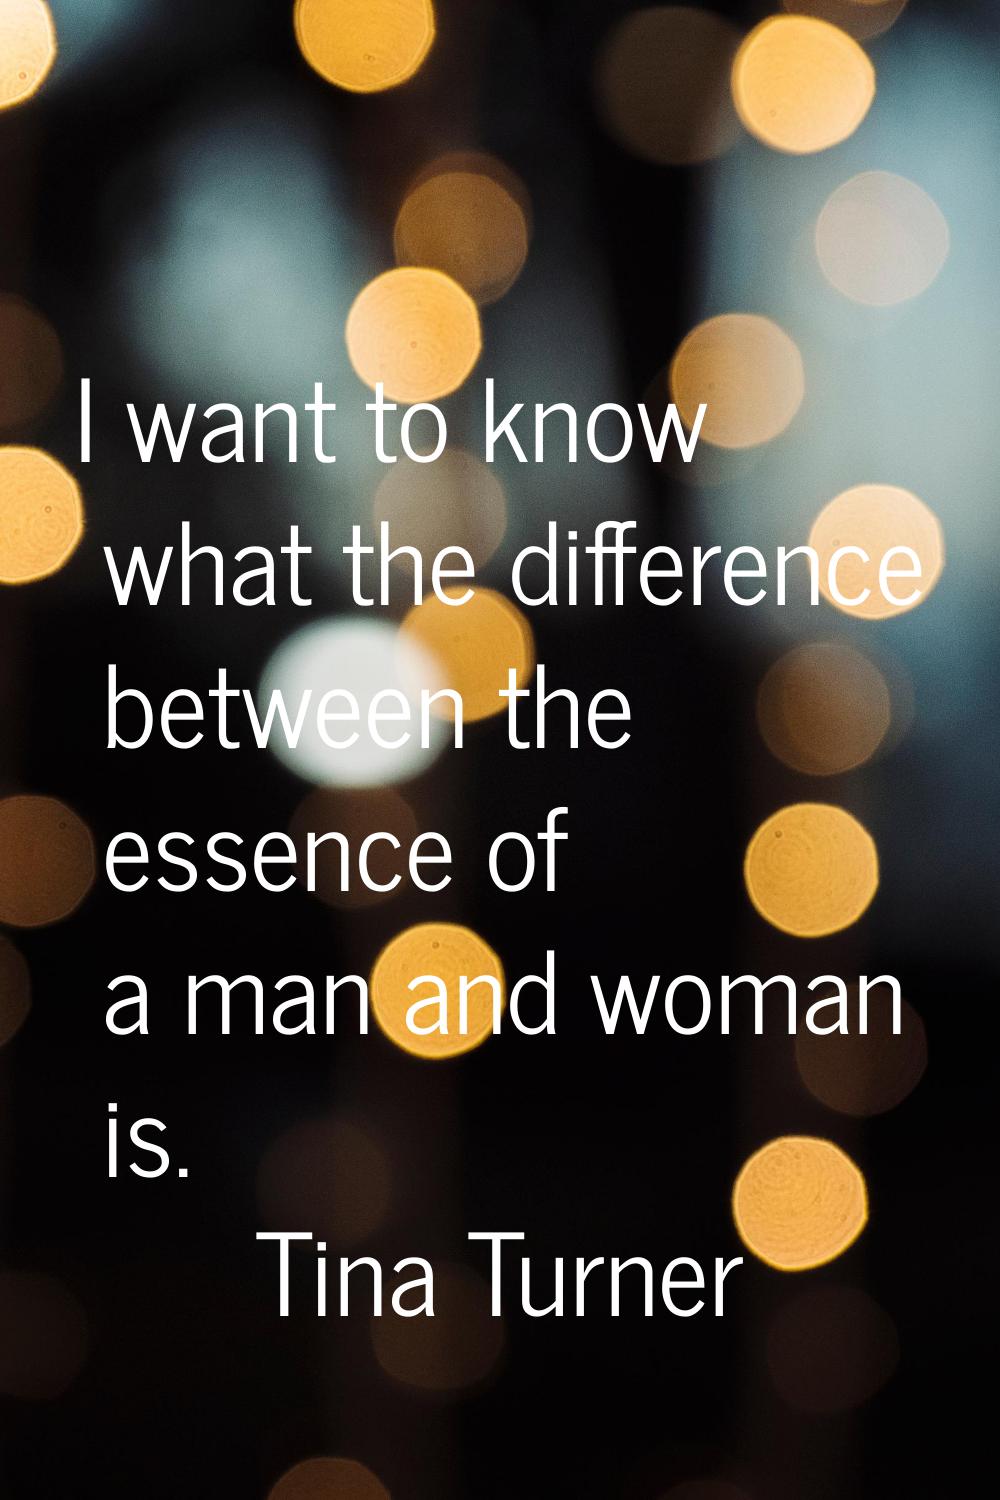 I want to know what the difference between the essence of a man and woman is.